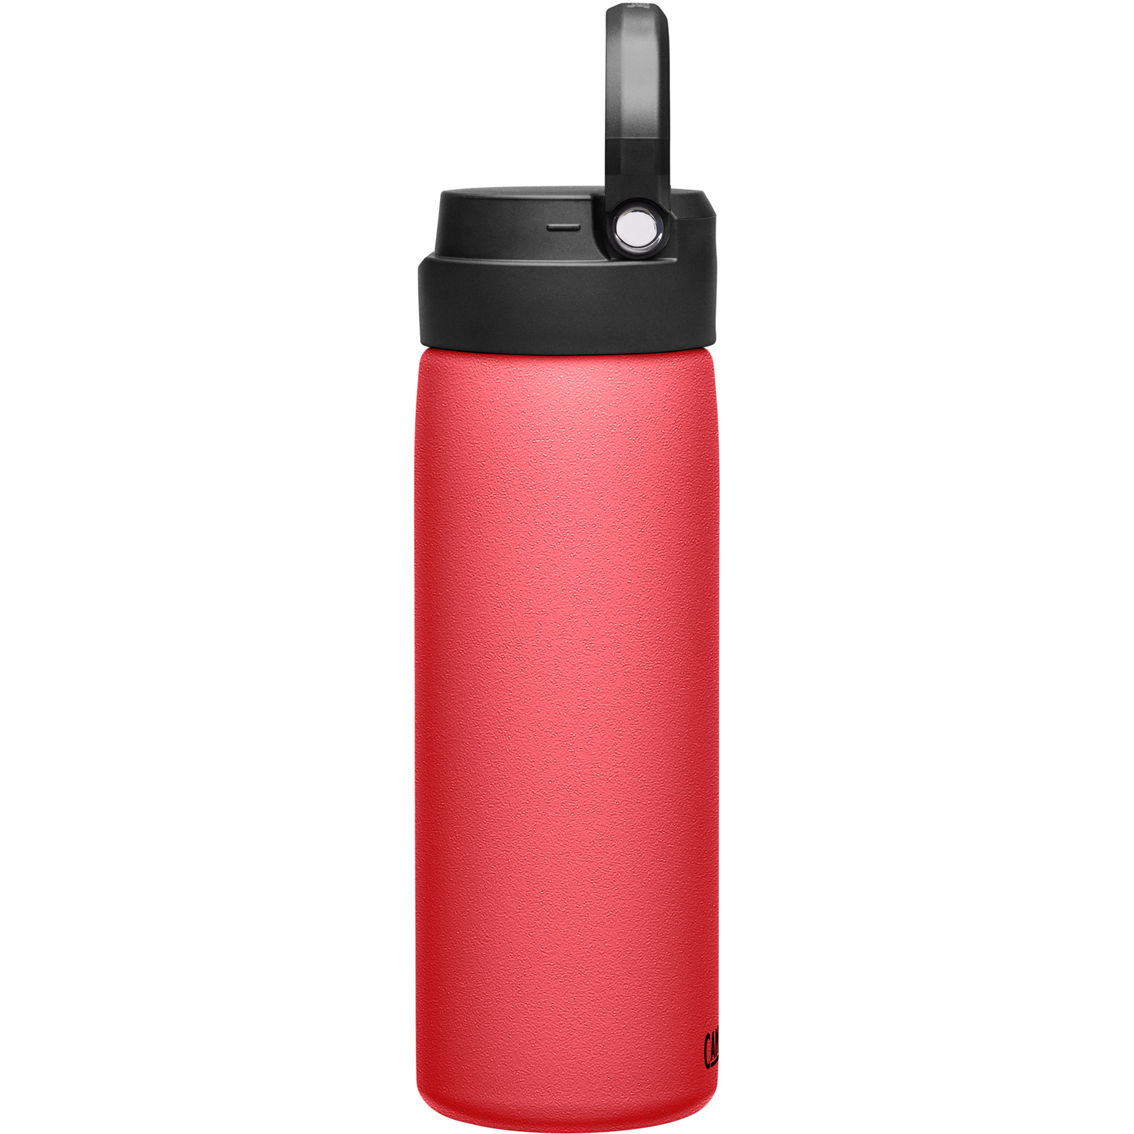 Camelbak Fit Cap Insulated Stainless Steel 20 oz. Water Bottle - Image 3 of 8